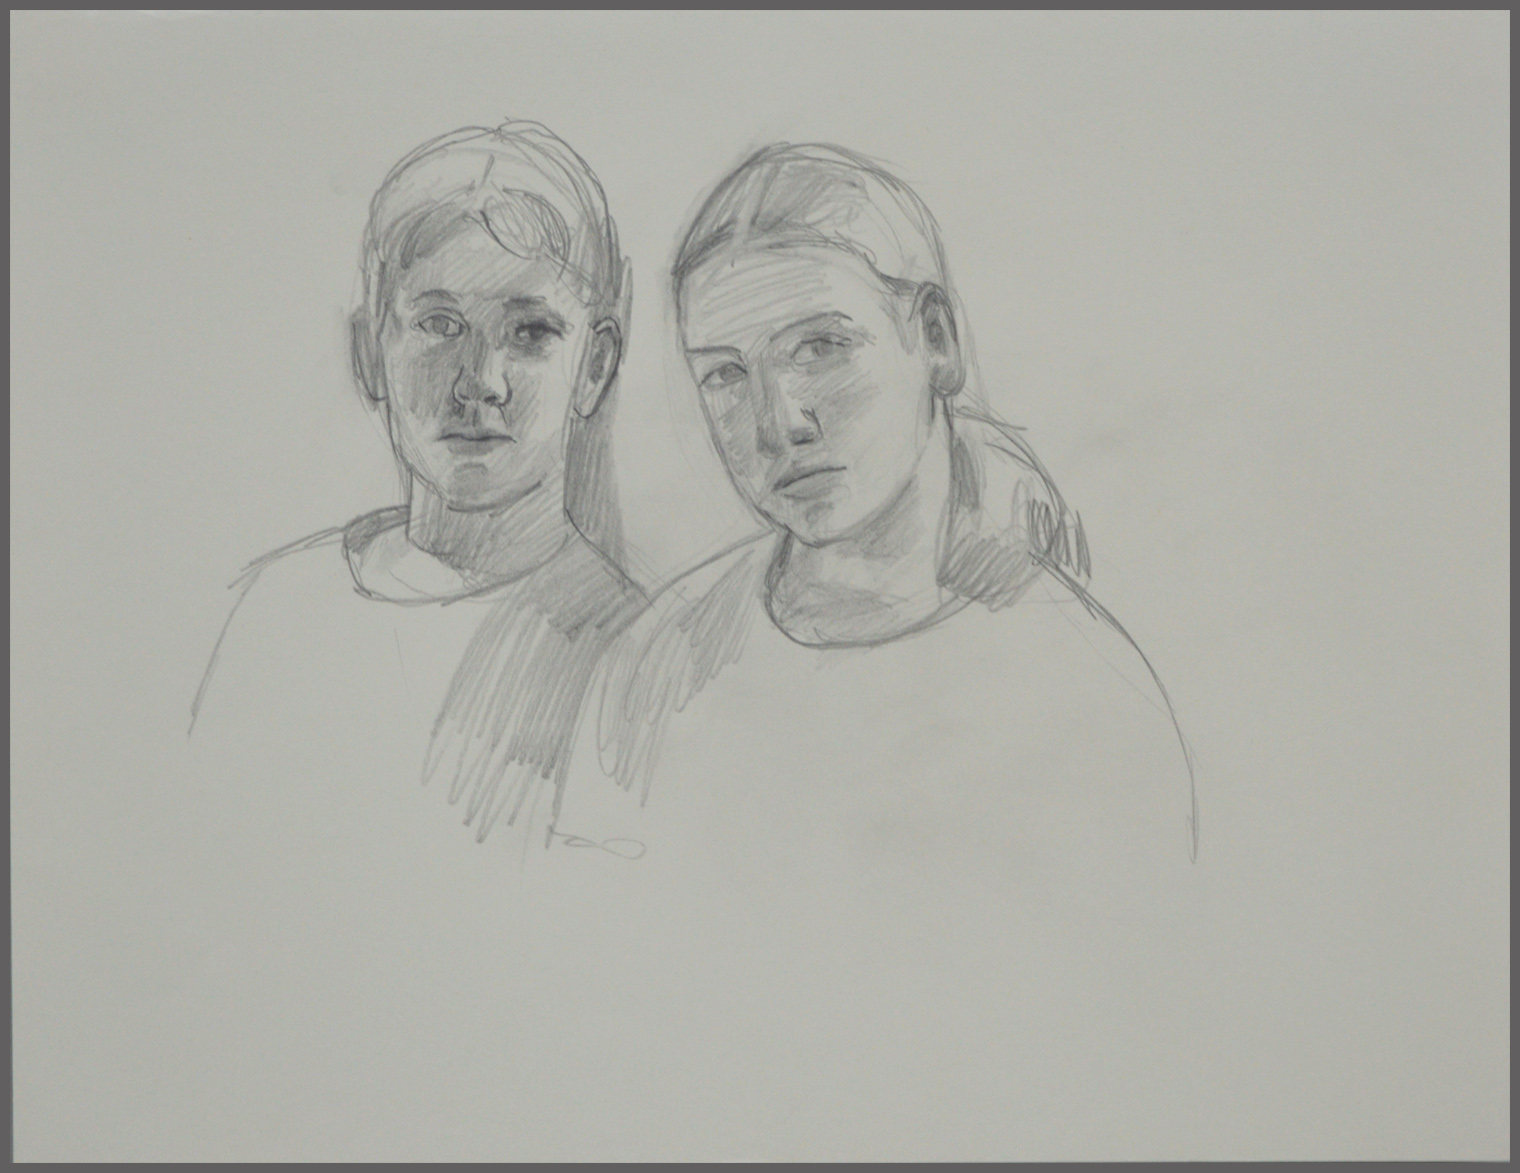  Andrew and Clara, pencil, 10 x 12.75 inches 